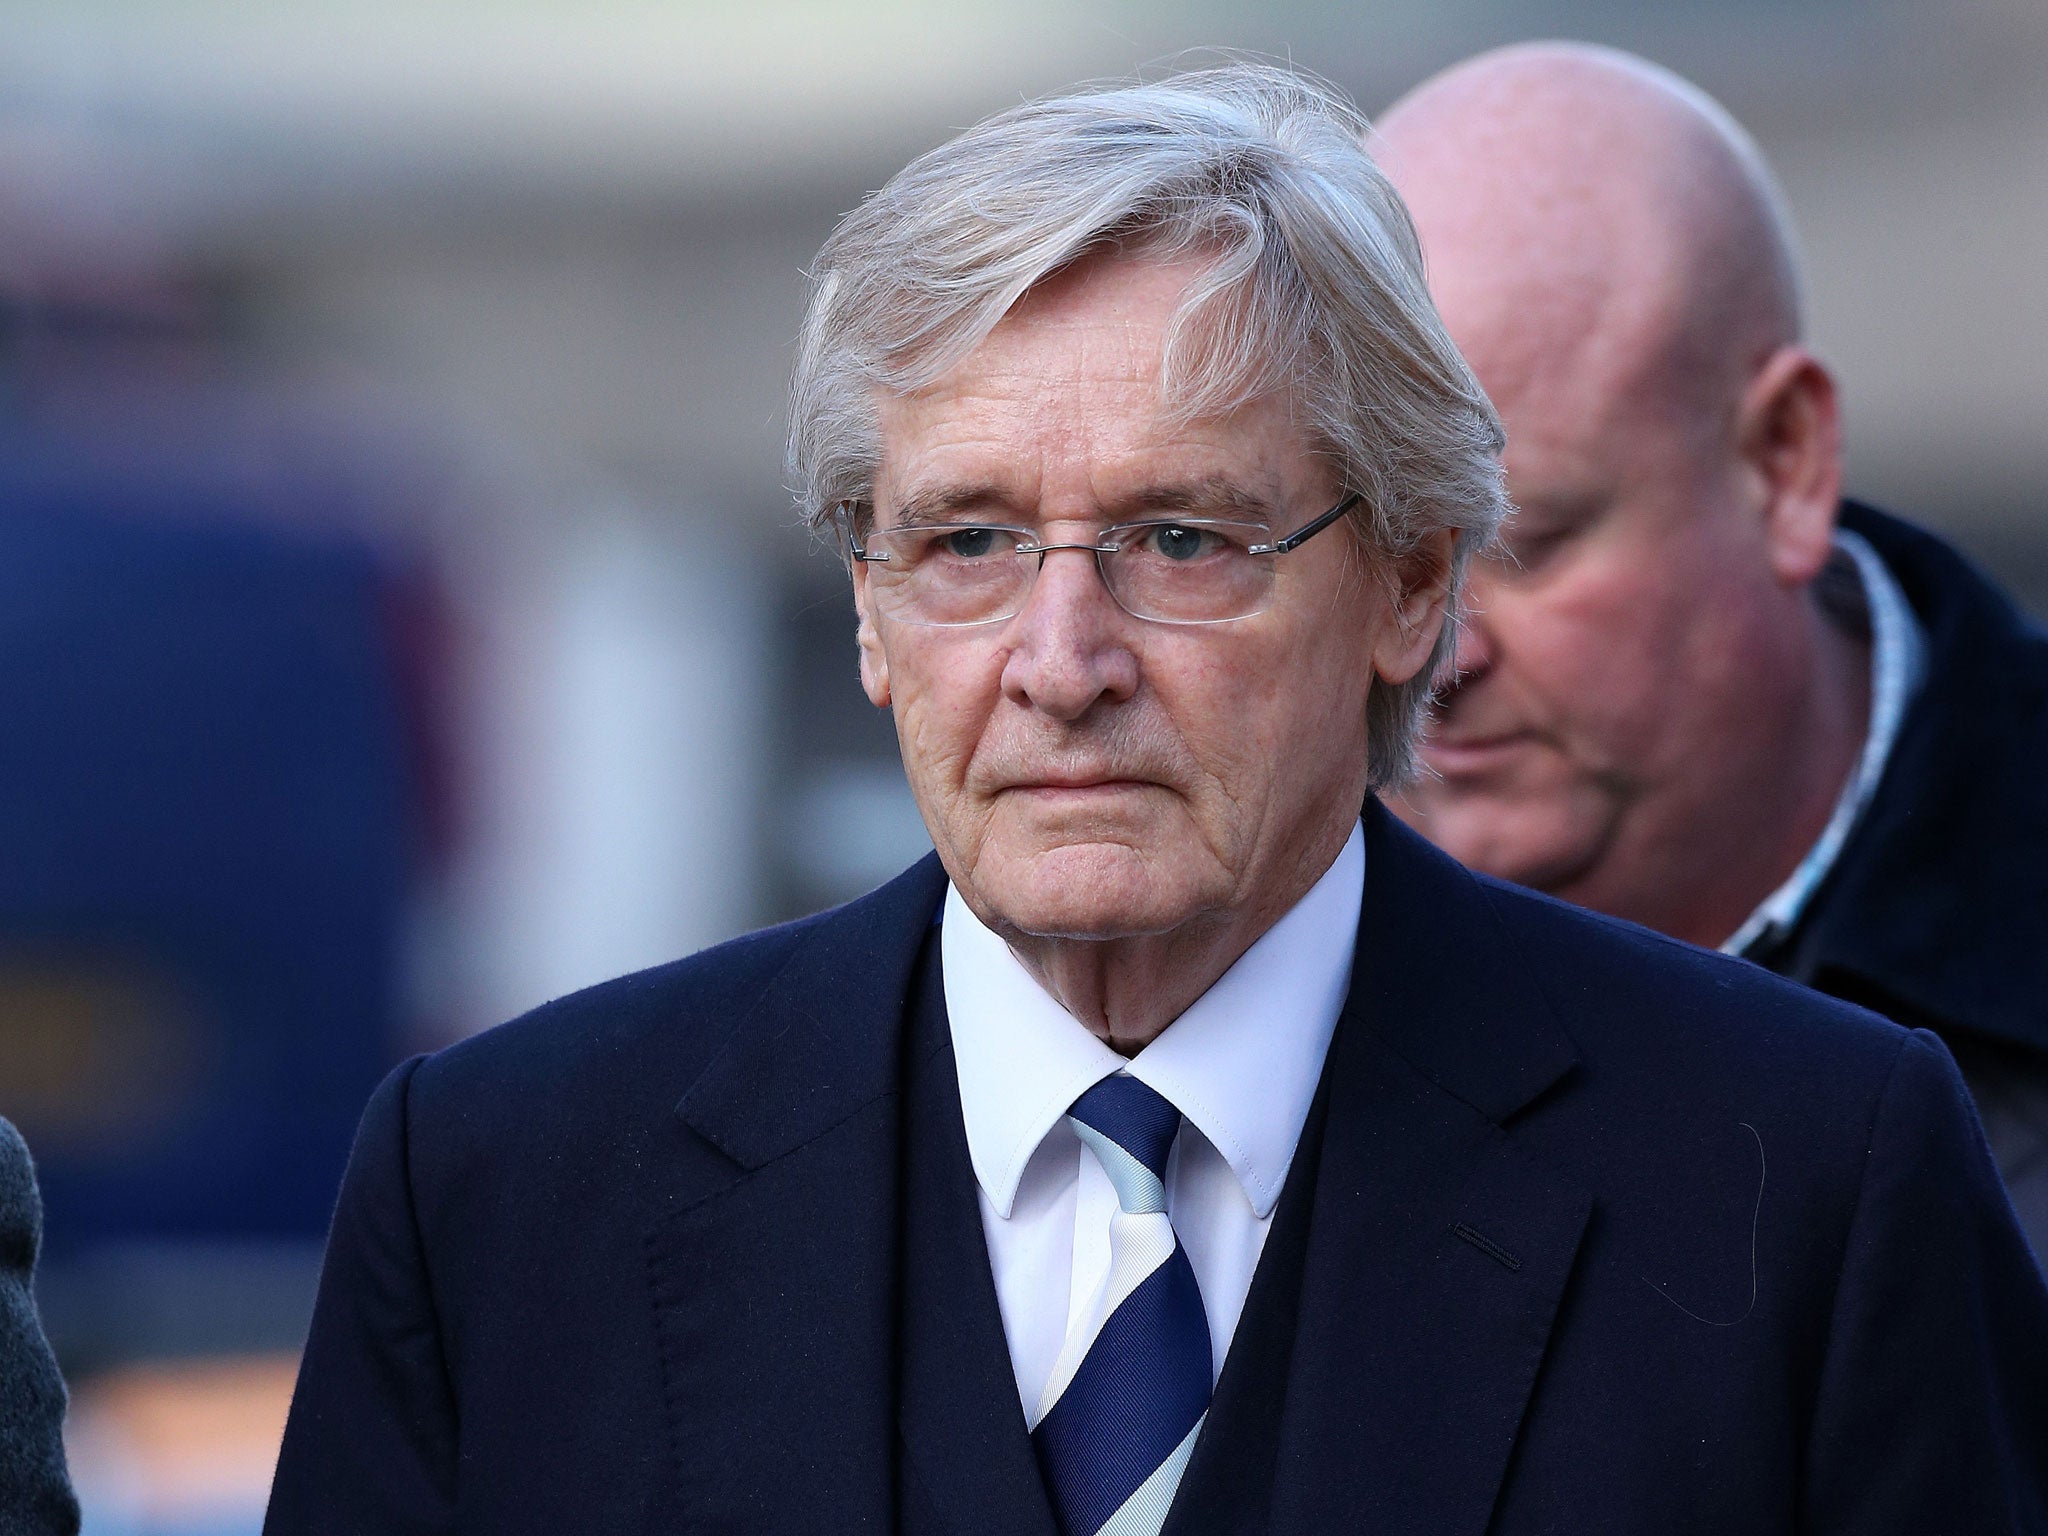 The jury has retired to consider its verdicts in the trial of Coronation Street star Bill Roache, pictured here as he arrived at Preston Crown Court today